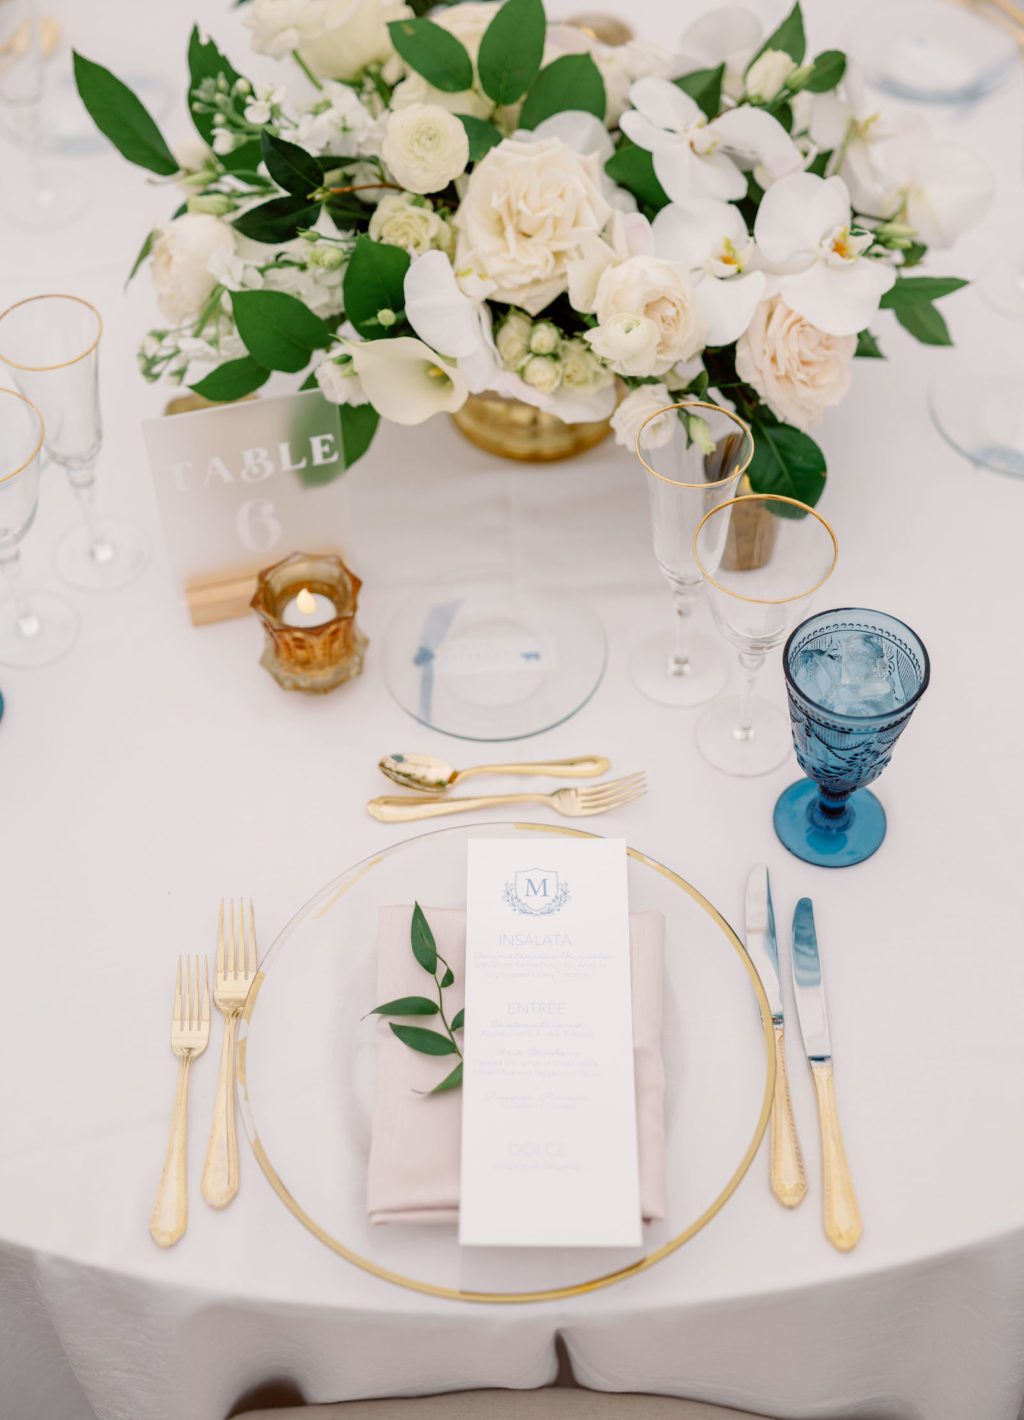 Elegant Luxurious Wedding Reception Decor, Gold Rimmed and Clear Glass Charger, Gold Flatware, Blue Water Goblet, Acrylic Table Number, White Roses, Orchids and Greenery Floral Centerpiece | Tampa Bay NK Productions Wedding Planning